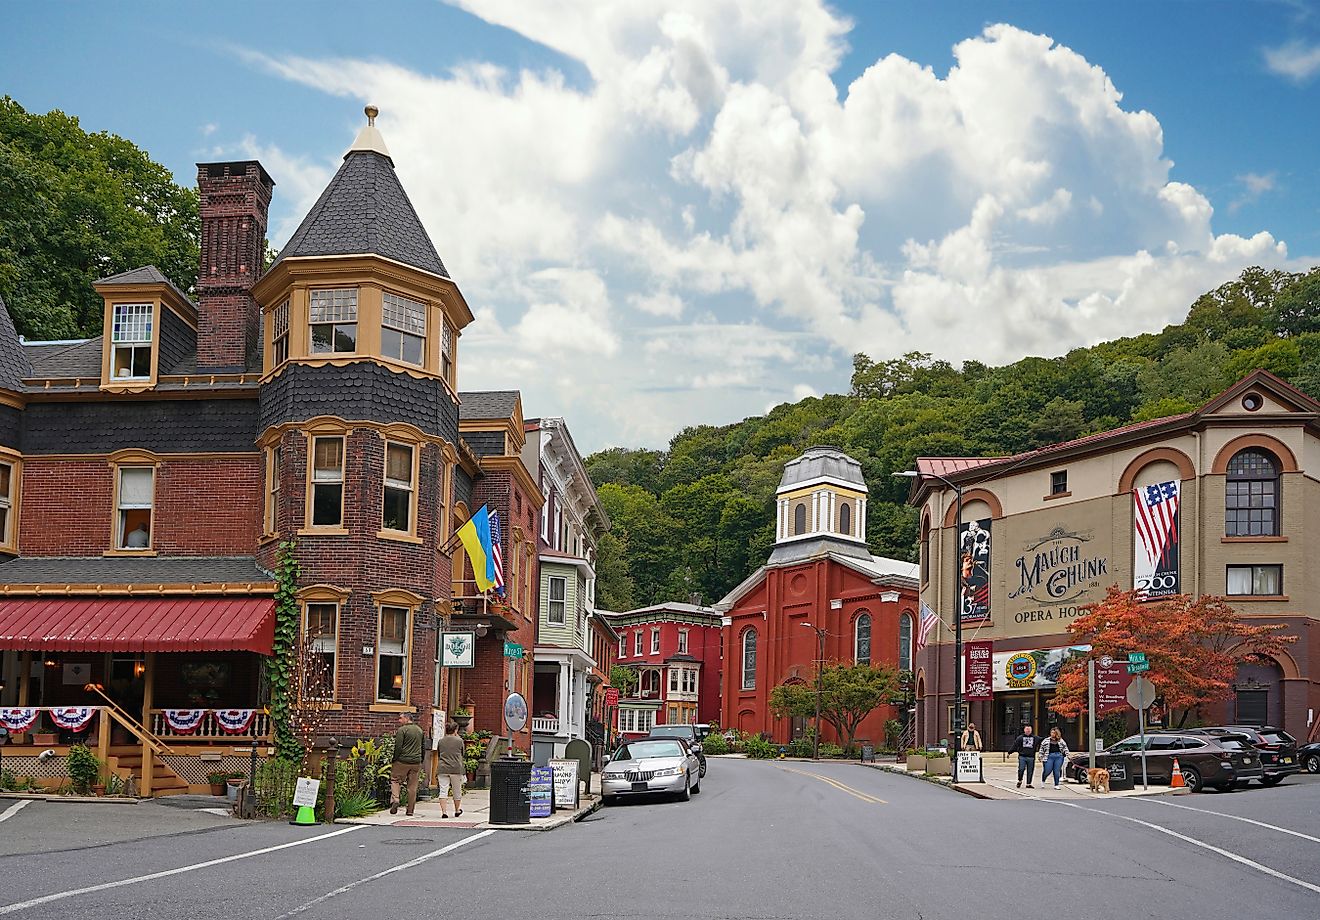 The Mauch Chunk Opera House in historic downtown Jim Thorpe , PA